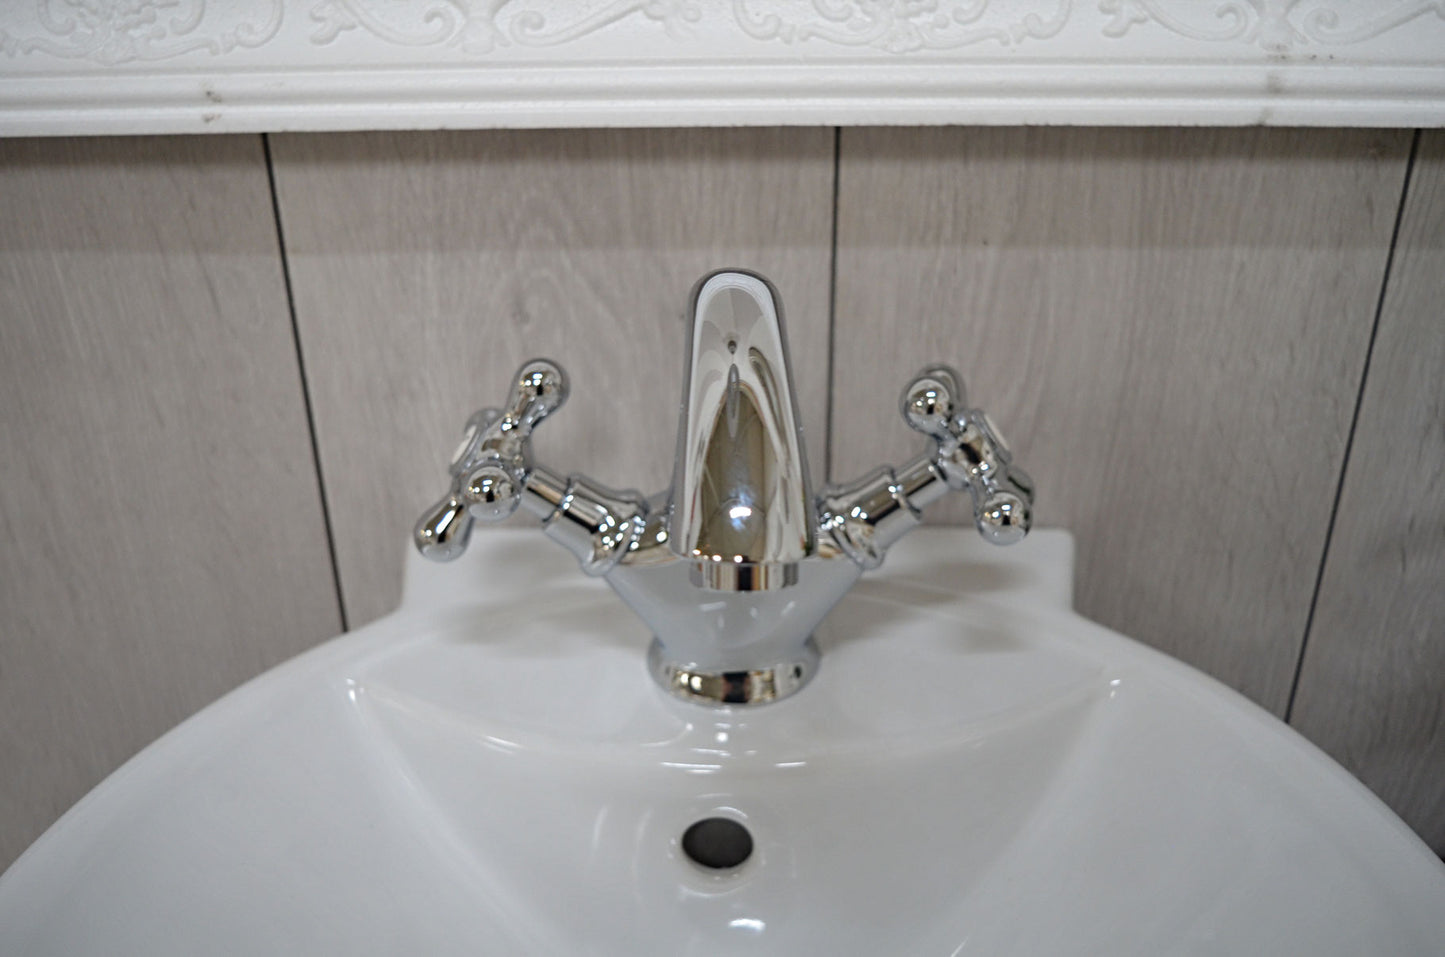 Amora chrome - Cross-handle mixer tap in country house style incl. waste valve